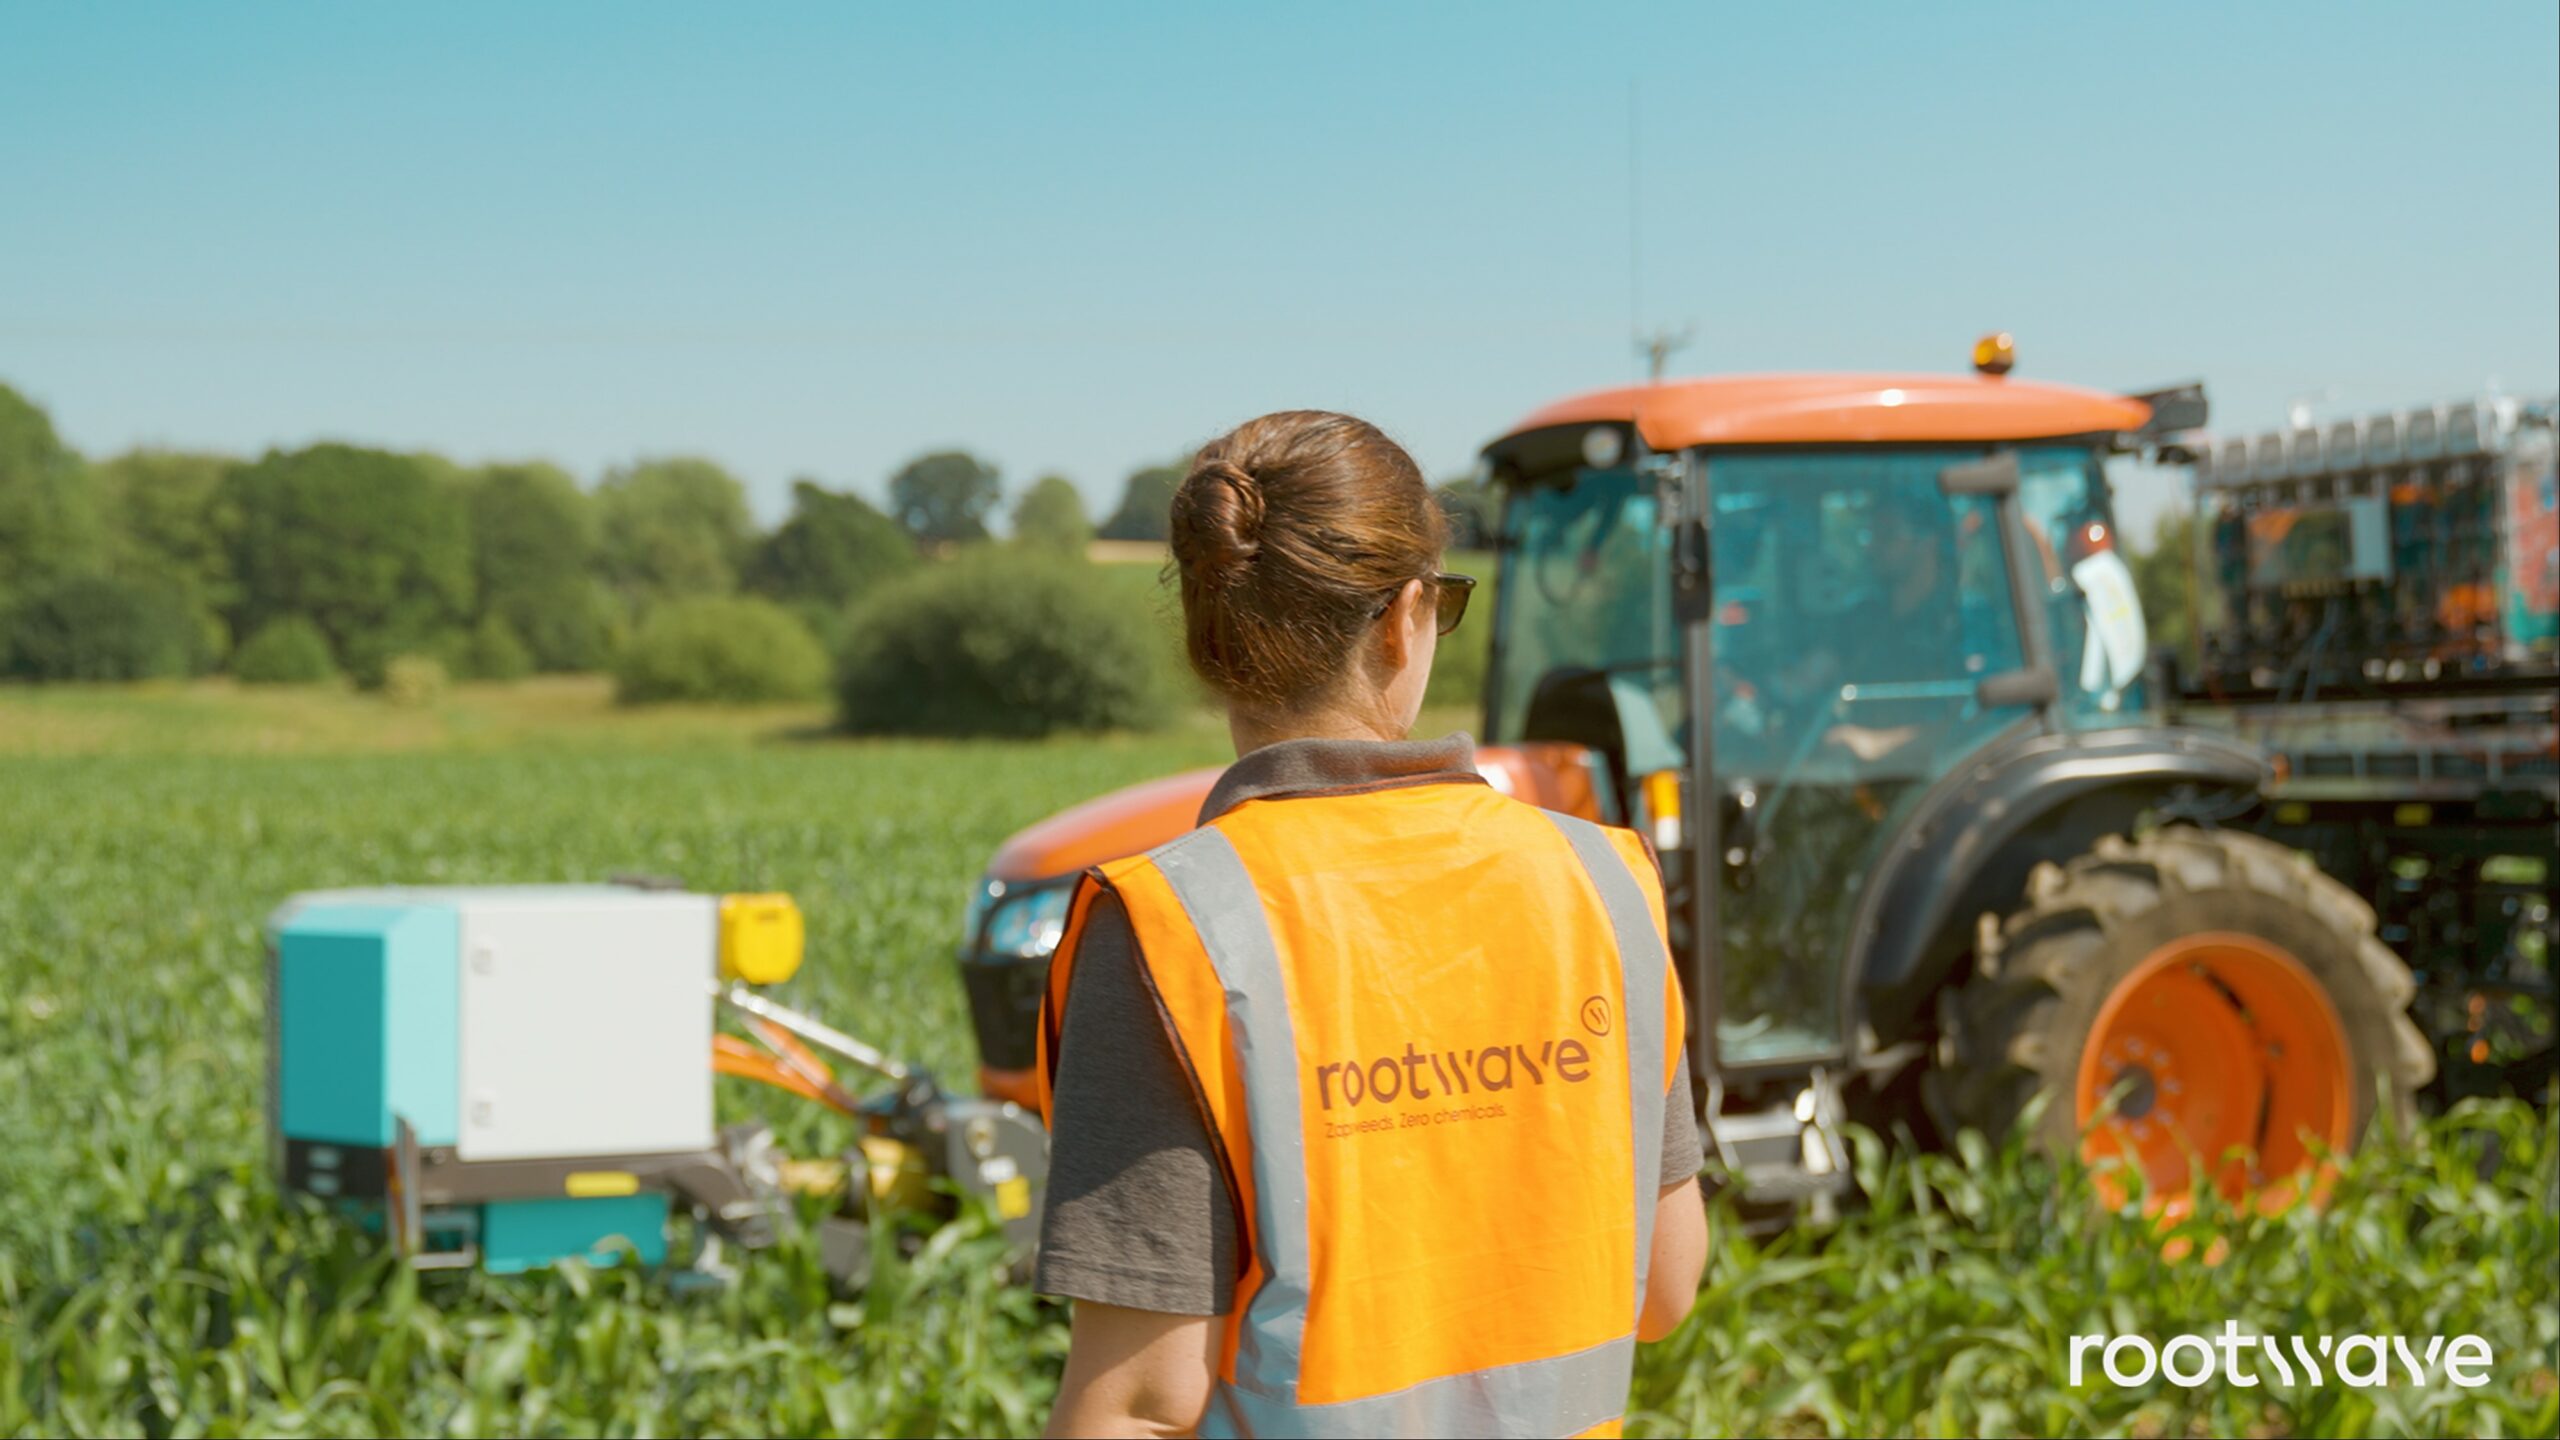 UK electrical weed control firm RootWave to open crowdfunding 